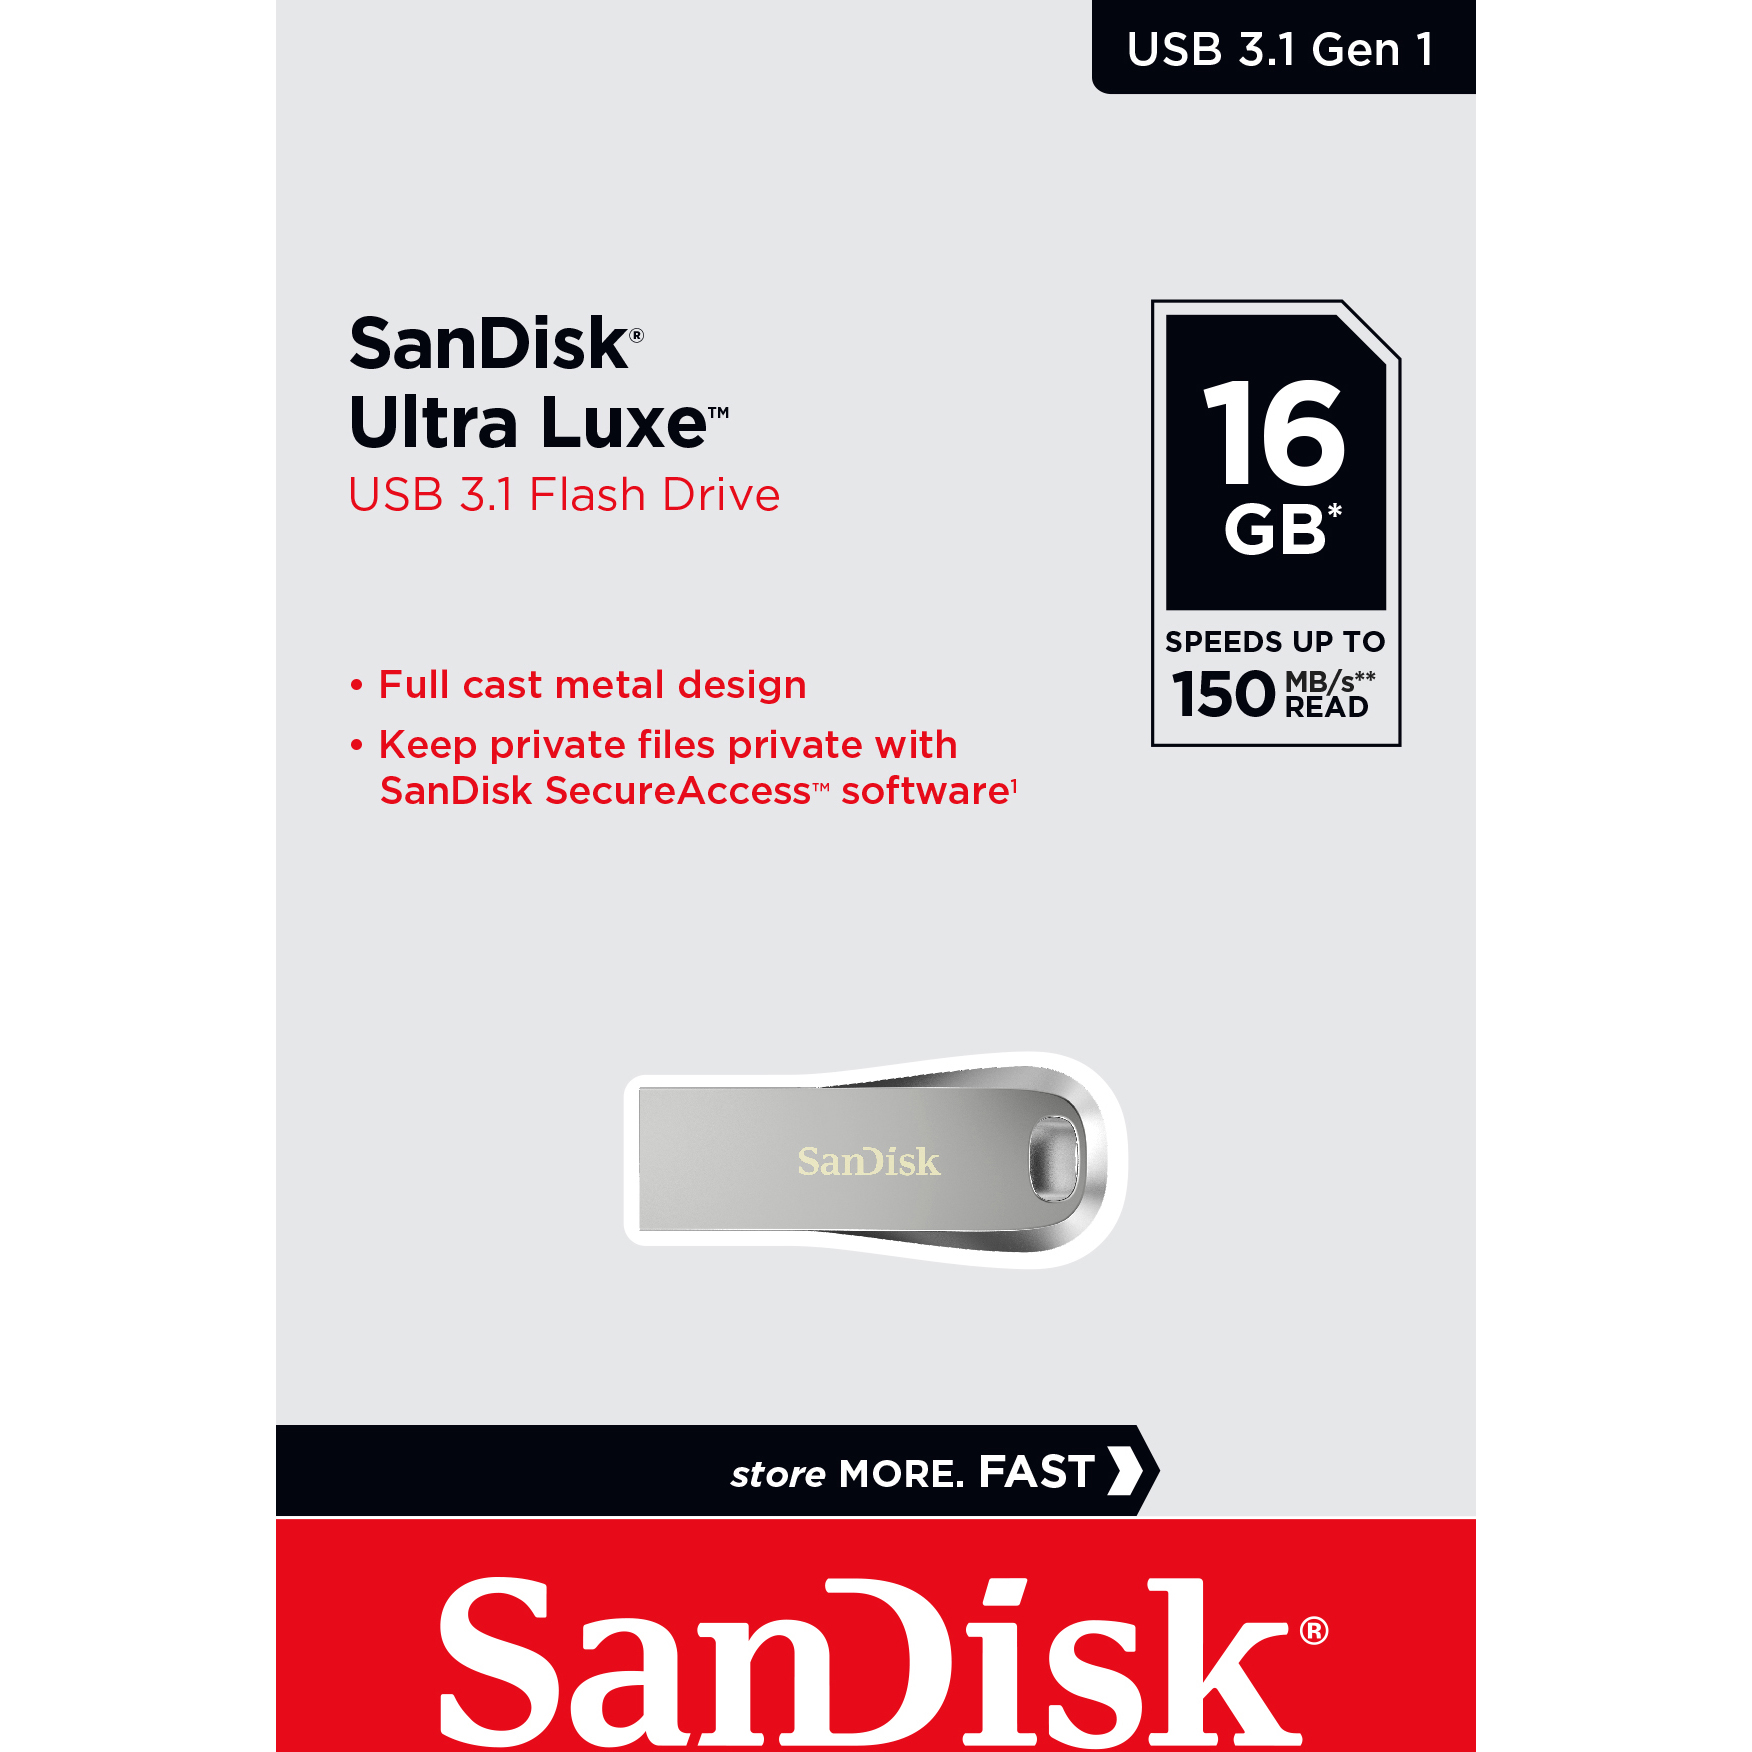 Original SanDisk Ultra Luxe 16GB Silver USB 3.1 Flash Drive (SDCZ74-016G-G46)